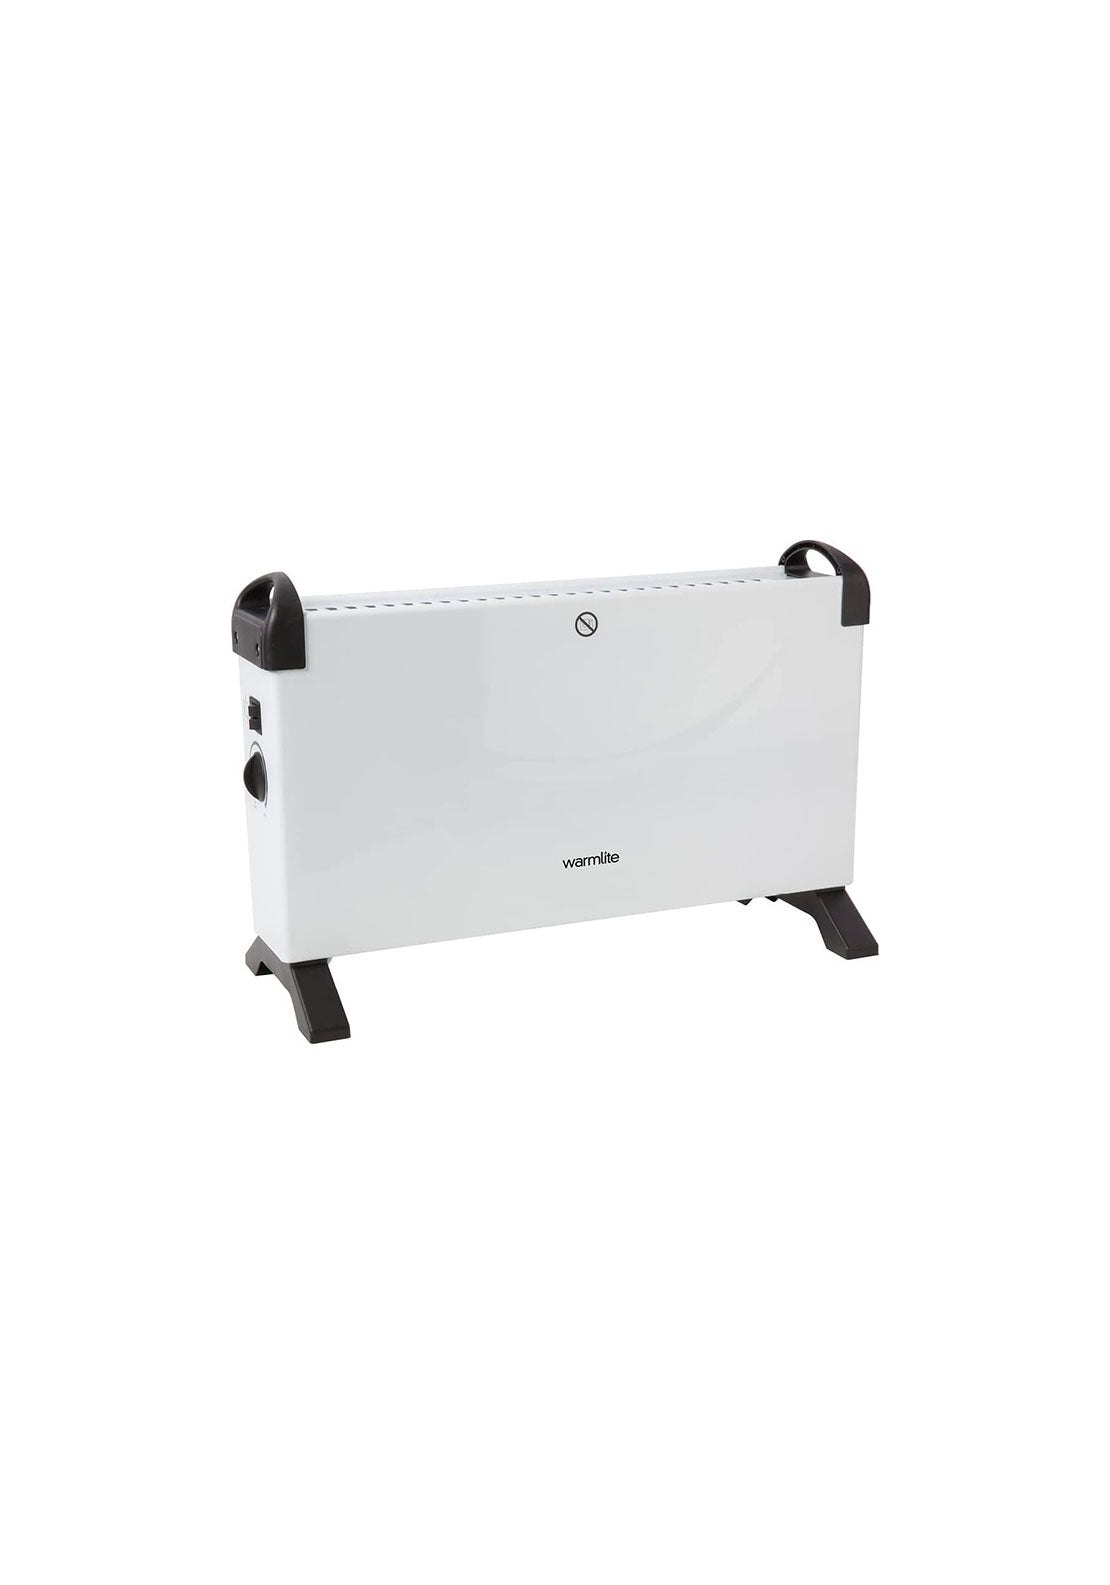 Warmlite Convection Heater | WL41007 1 Shaws Department Stores